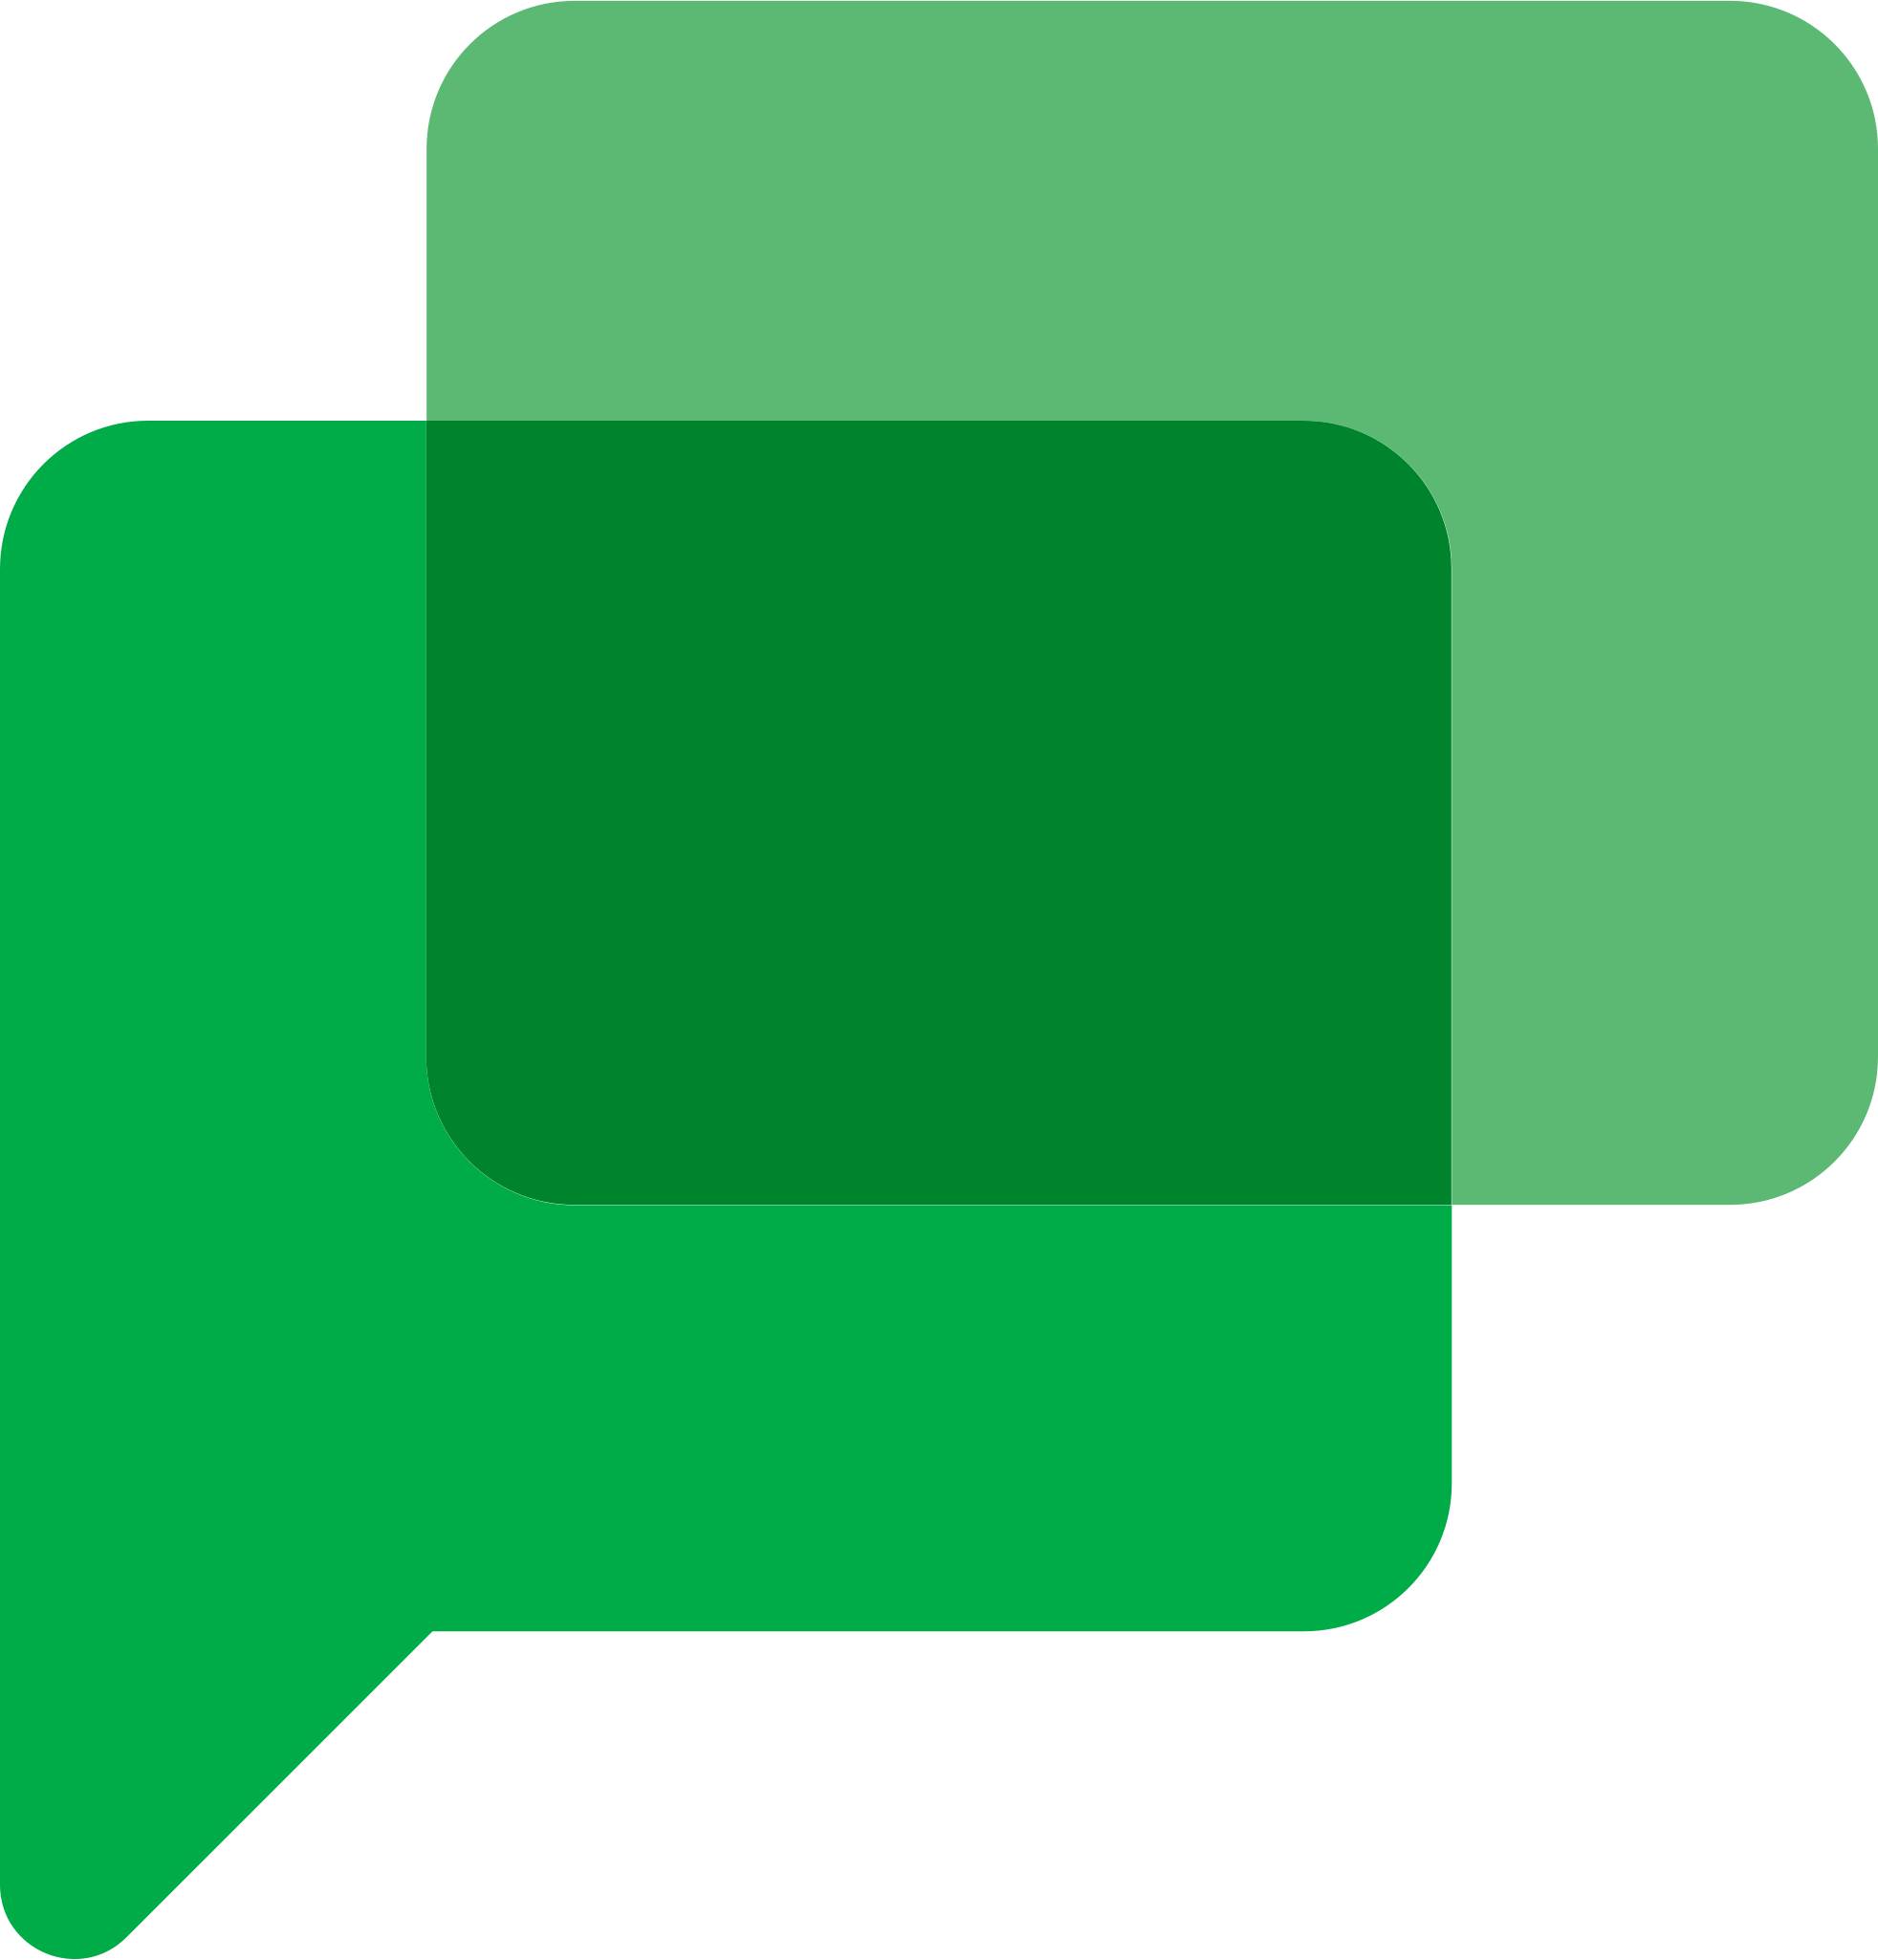 File:Google Chat Icon (2020).Svg - Wikimedia Commons